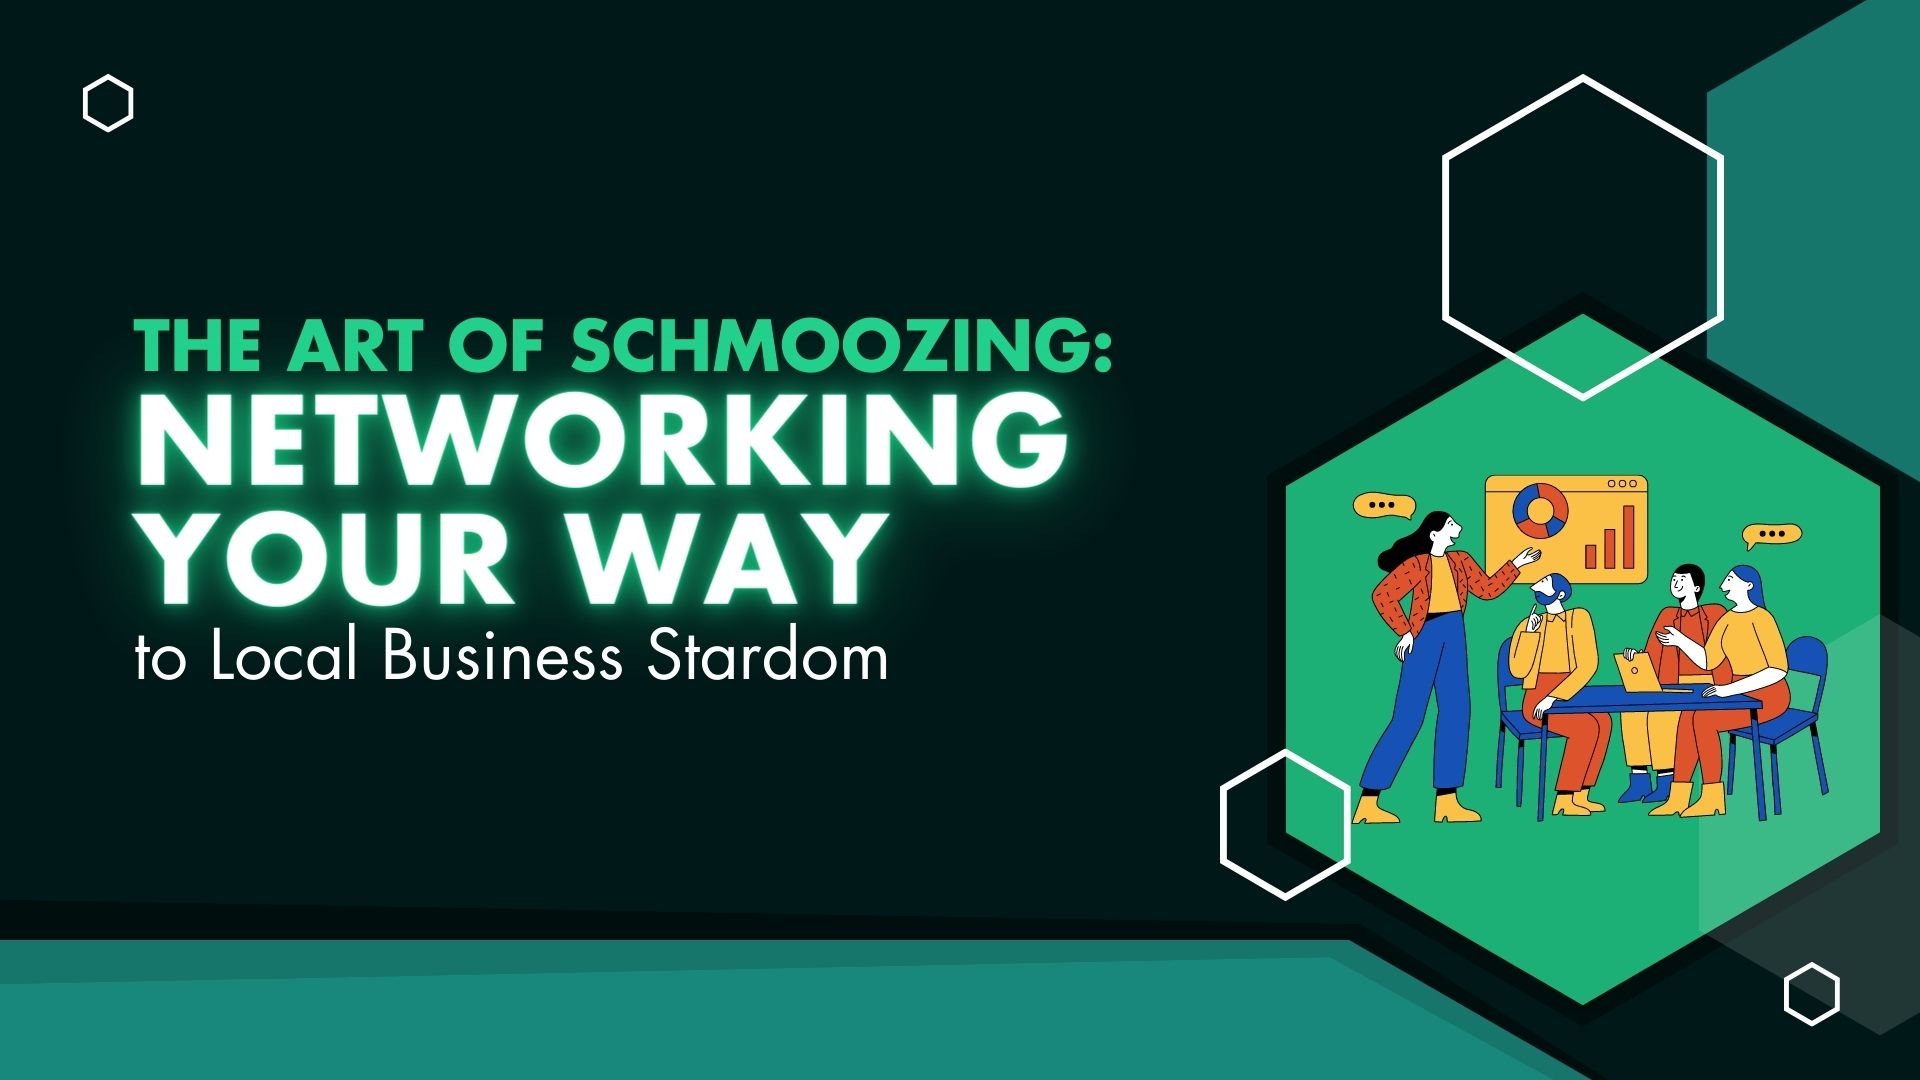 The Art of Schmoozing: Networking Your Way to Local Business Stardom